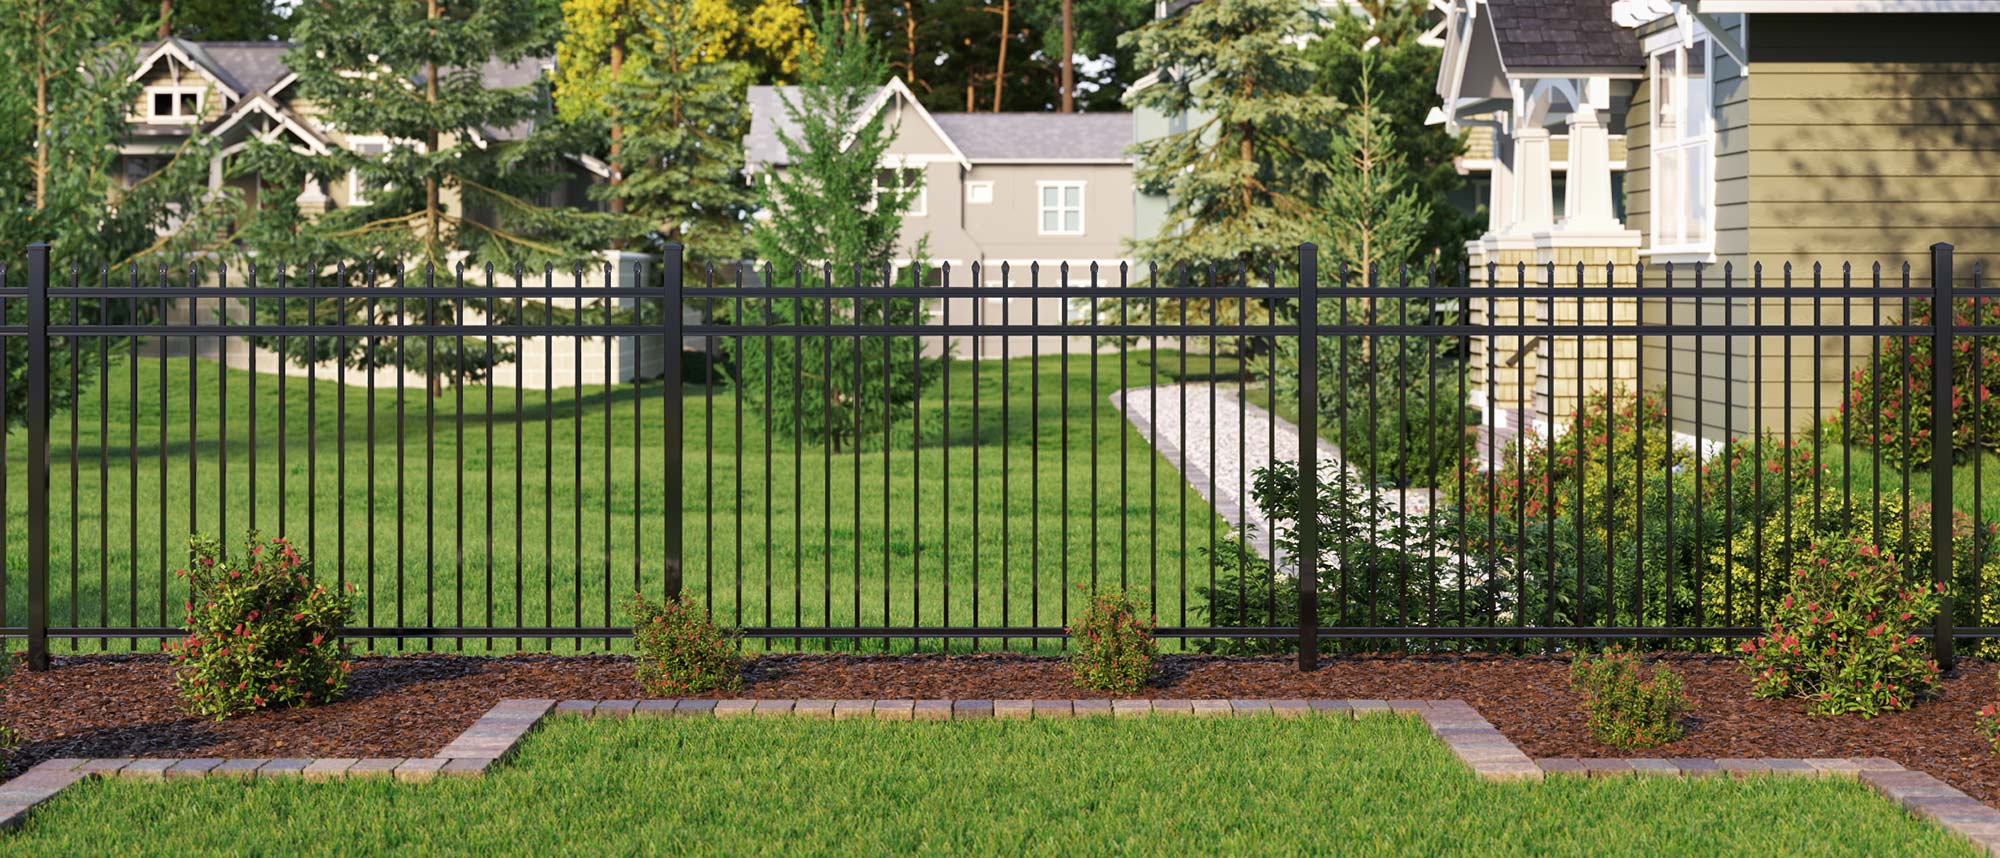 Evansville Indiana Aluminum Security Fence - Marble Style